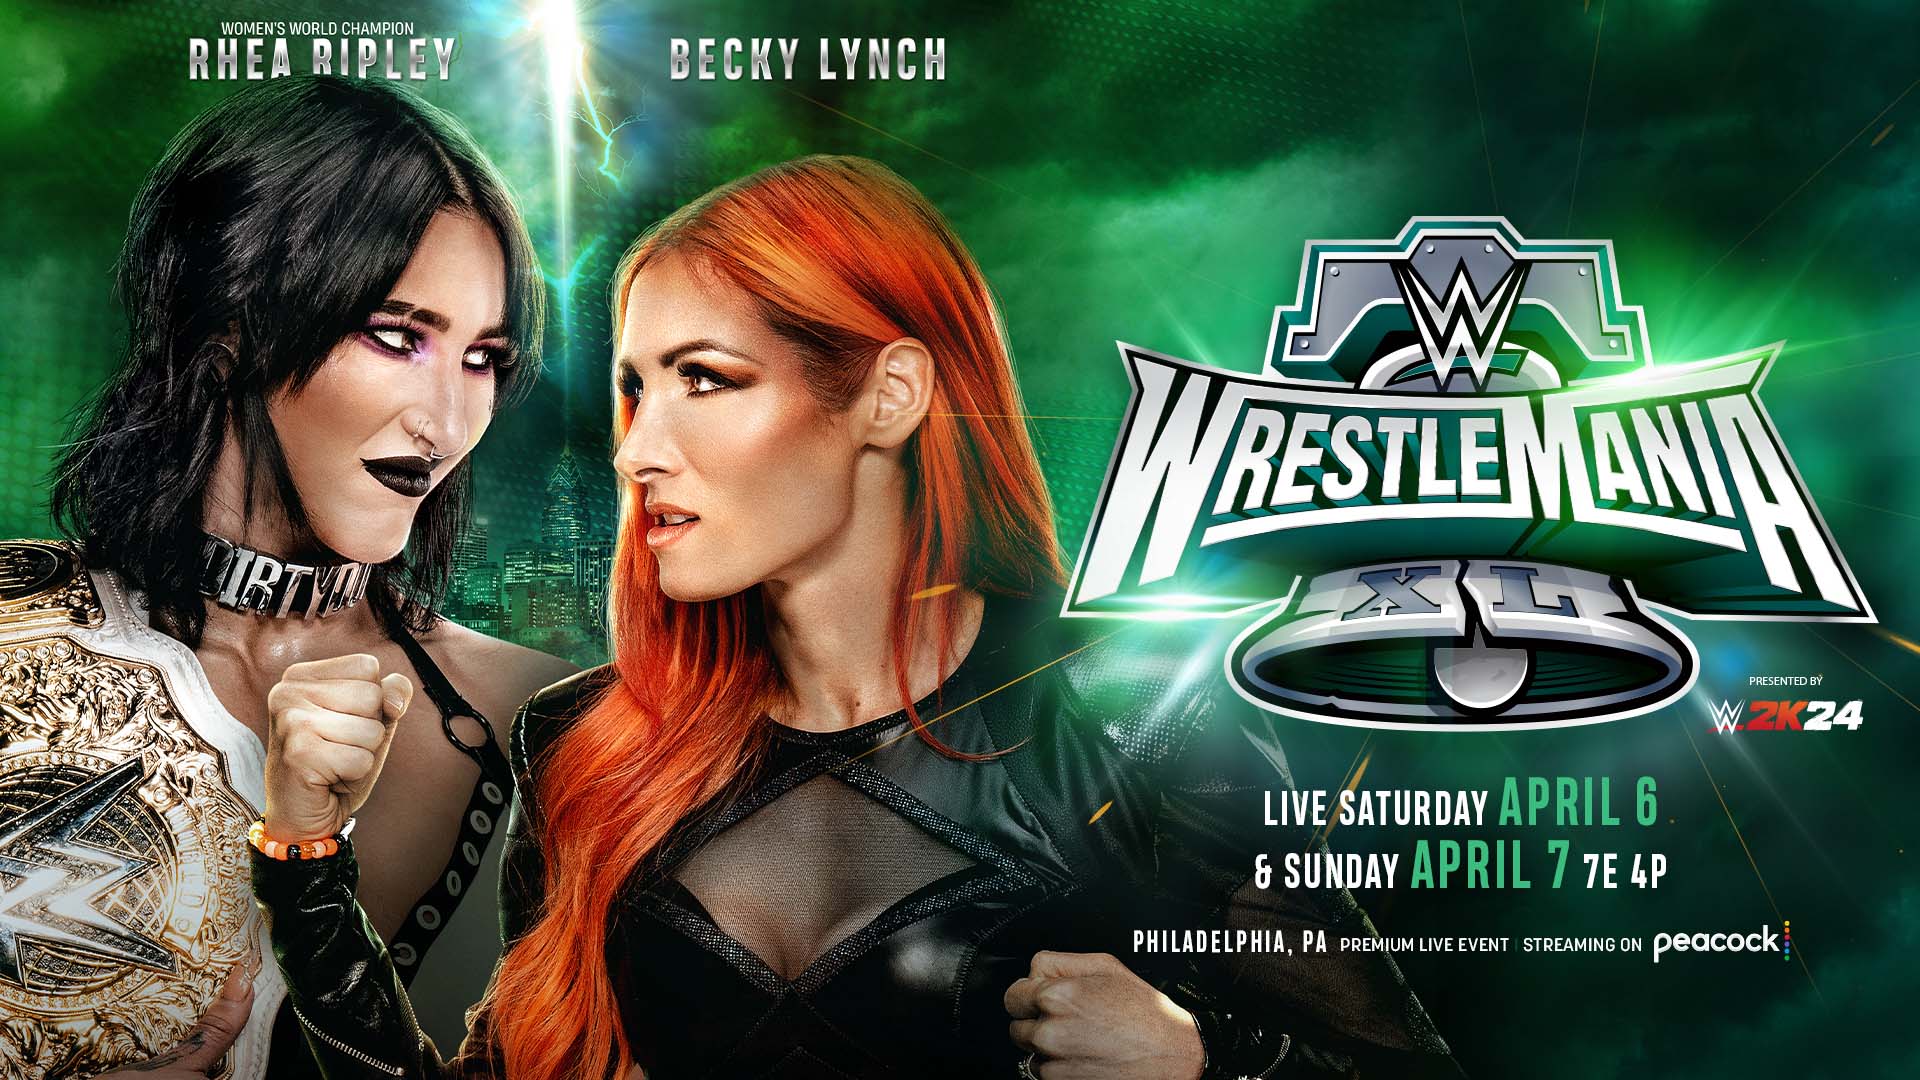 Becky Lynch aims to start WrestleMania 40 and defeat Rhea Ripley